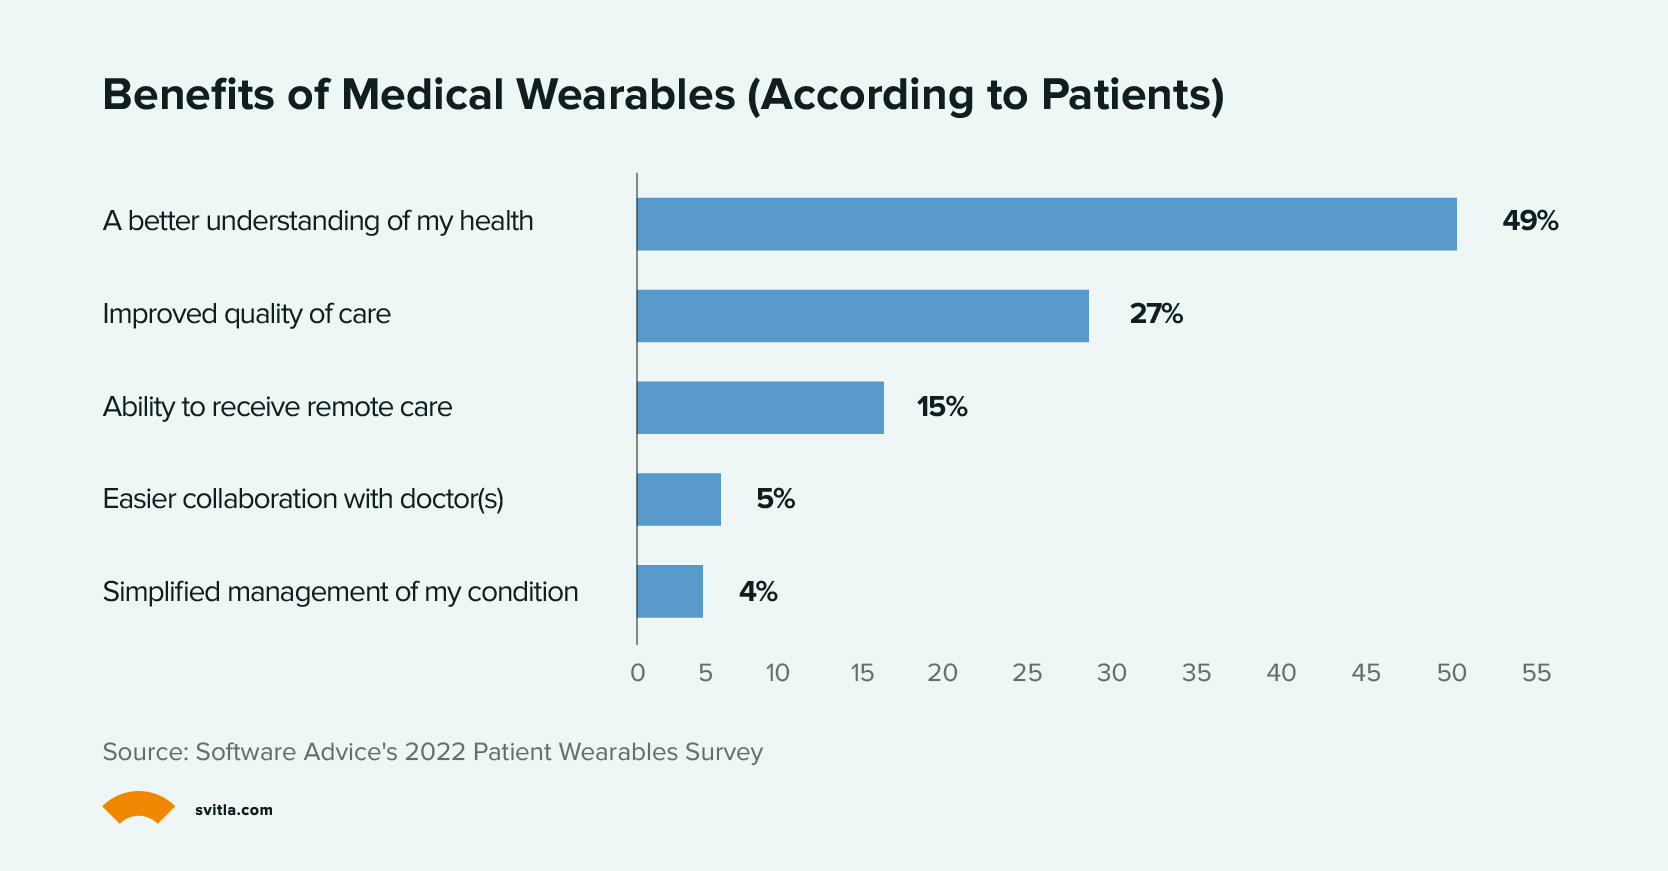 Benefits of Medical Wearables